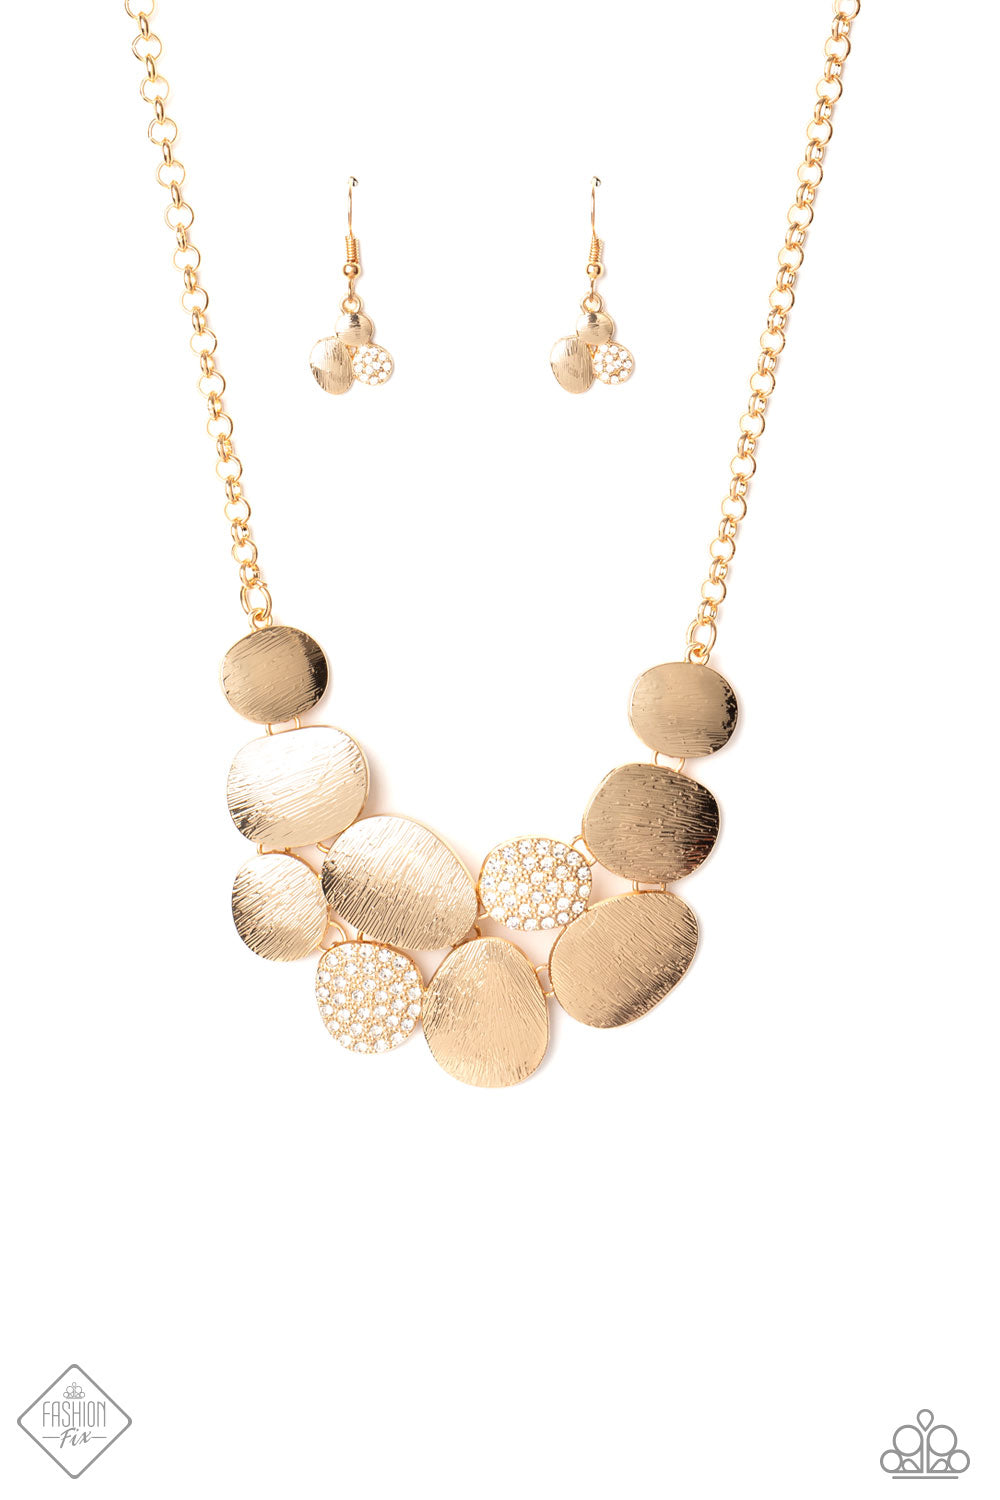 Gold necklace featuring a collection of asymmetrical oval discs connect into a clustered pendant below the collar for a refined flair.